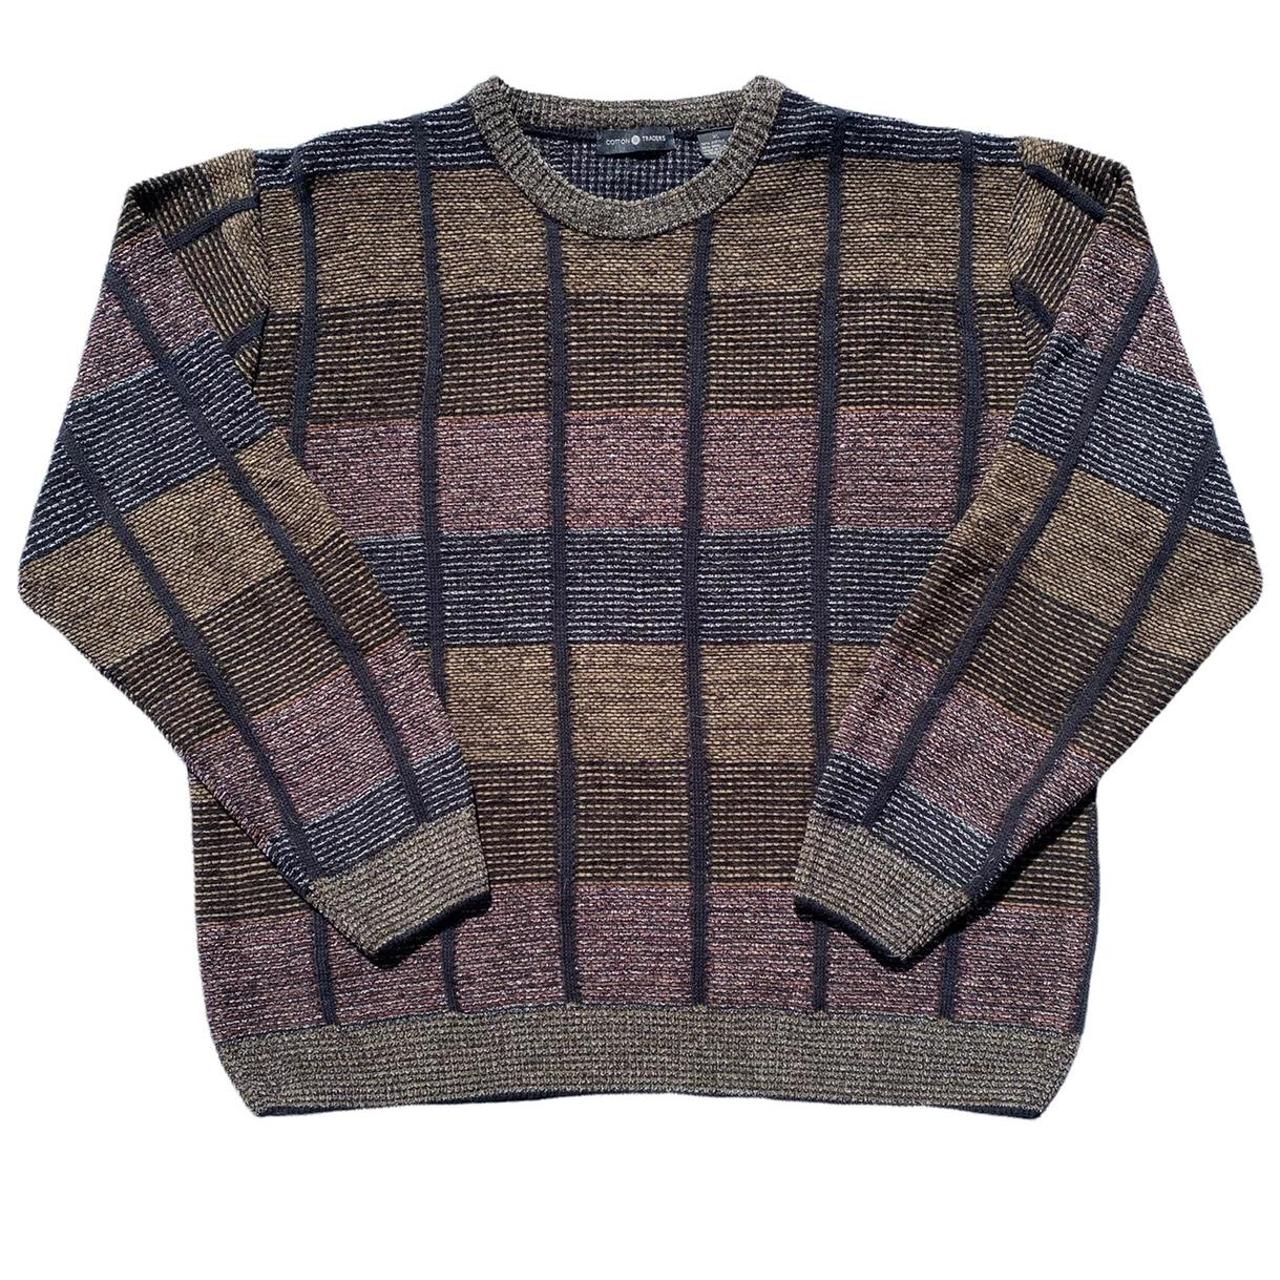 Product Image 1 - Vintage Colorblocking Earthtones Cosby Sweater
Measurements:
Tag